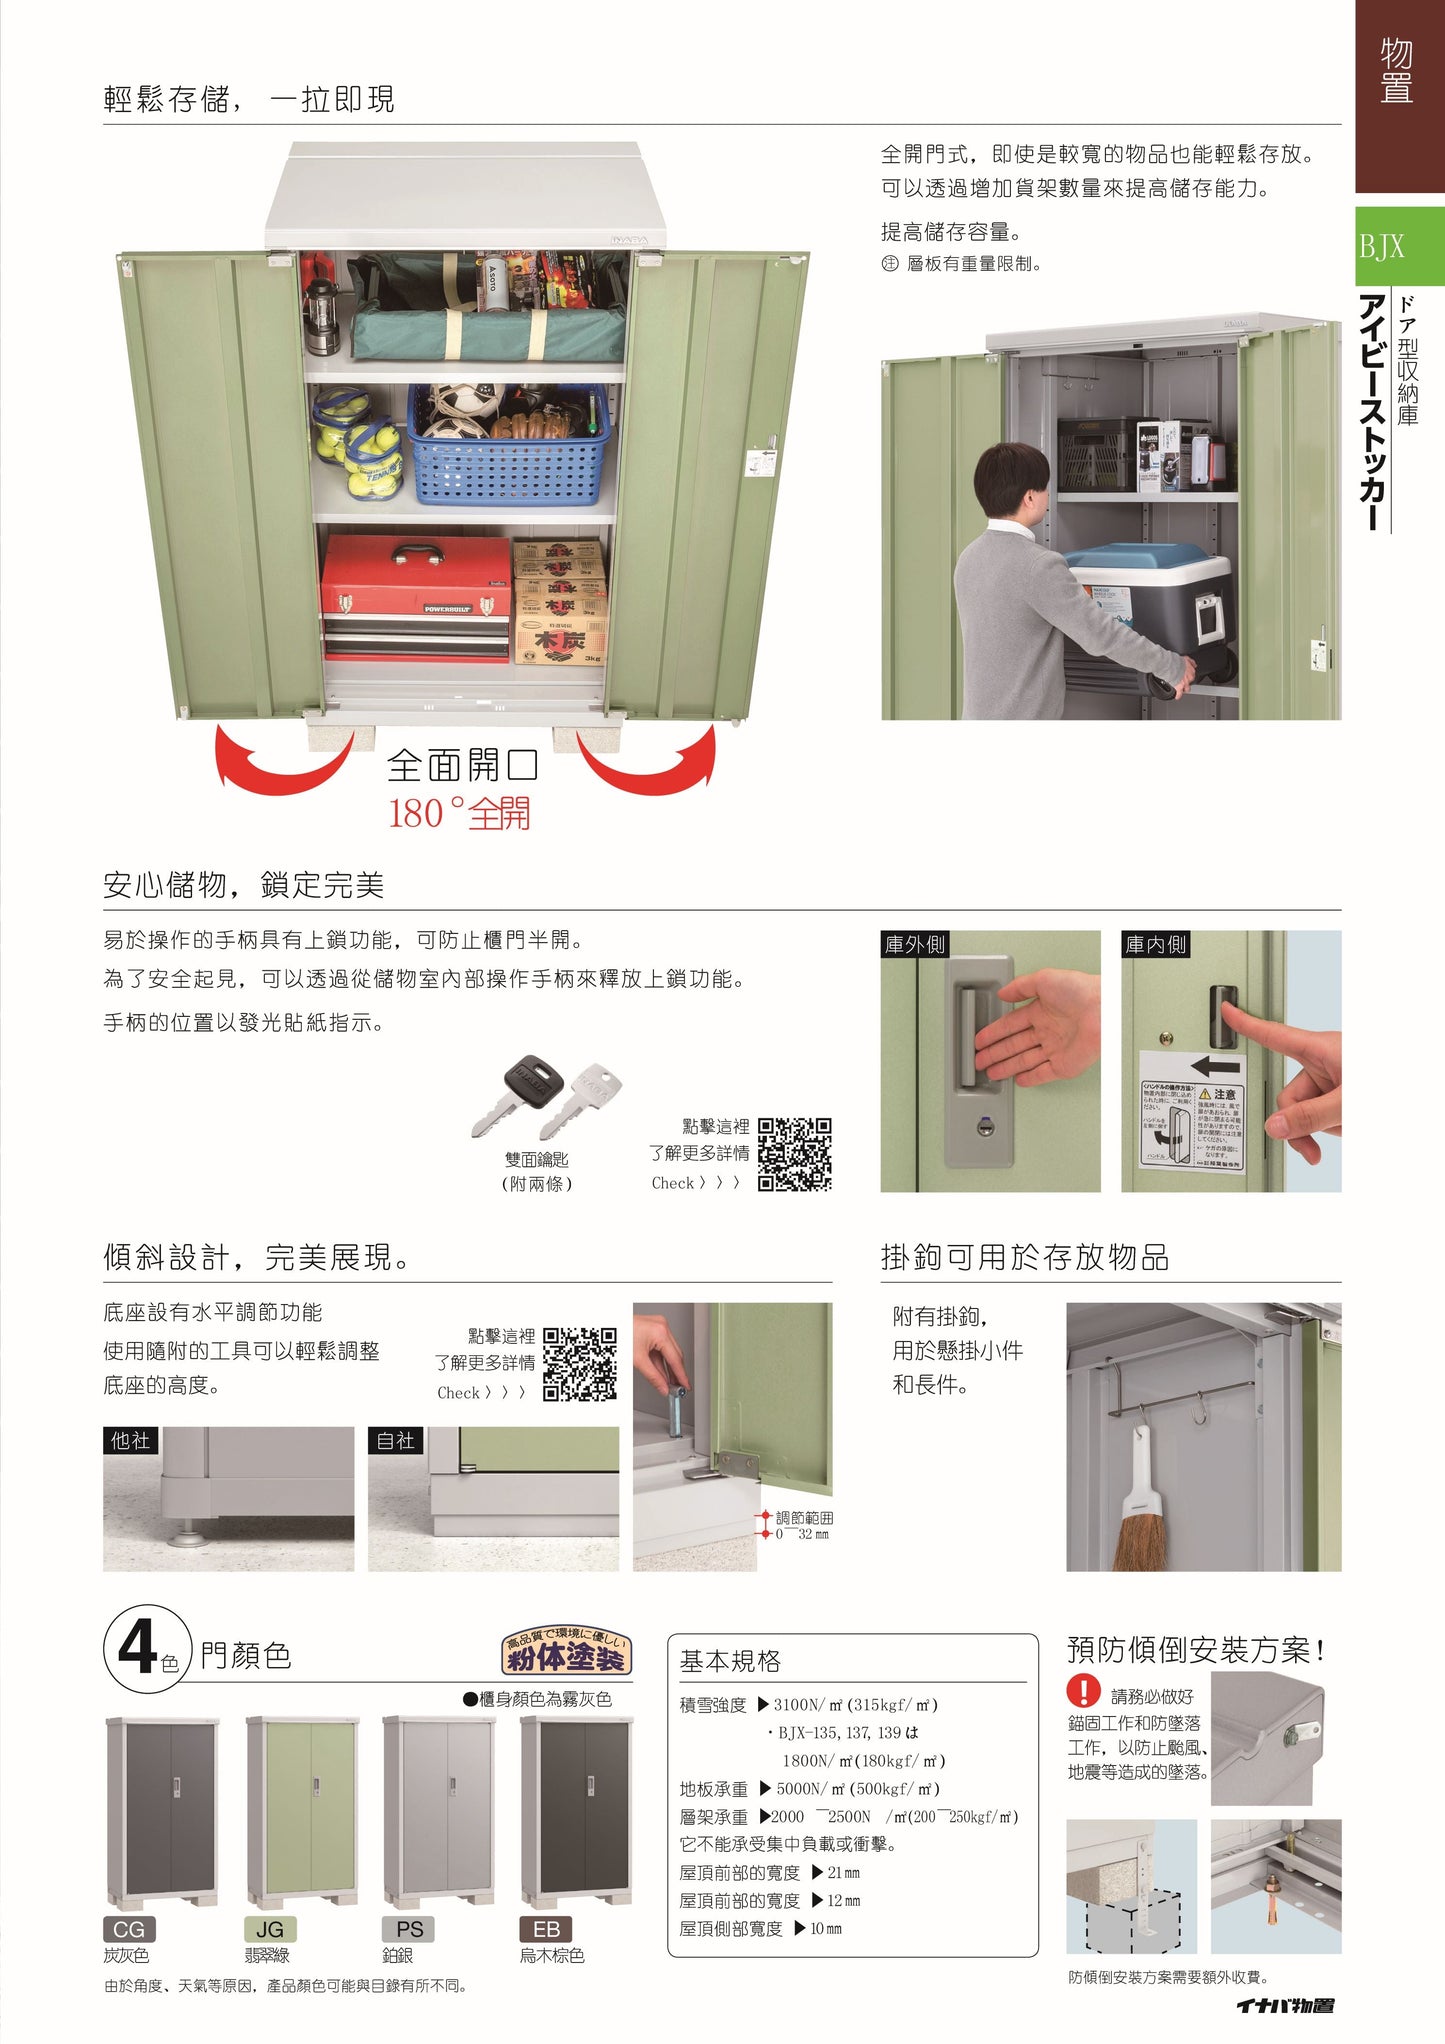 *Pre-order* Inaba Outdoor Storage BJX-095C (W920XD548XH1303mm)0.657m3